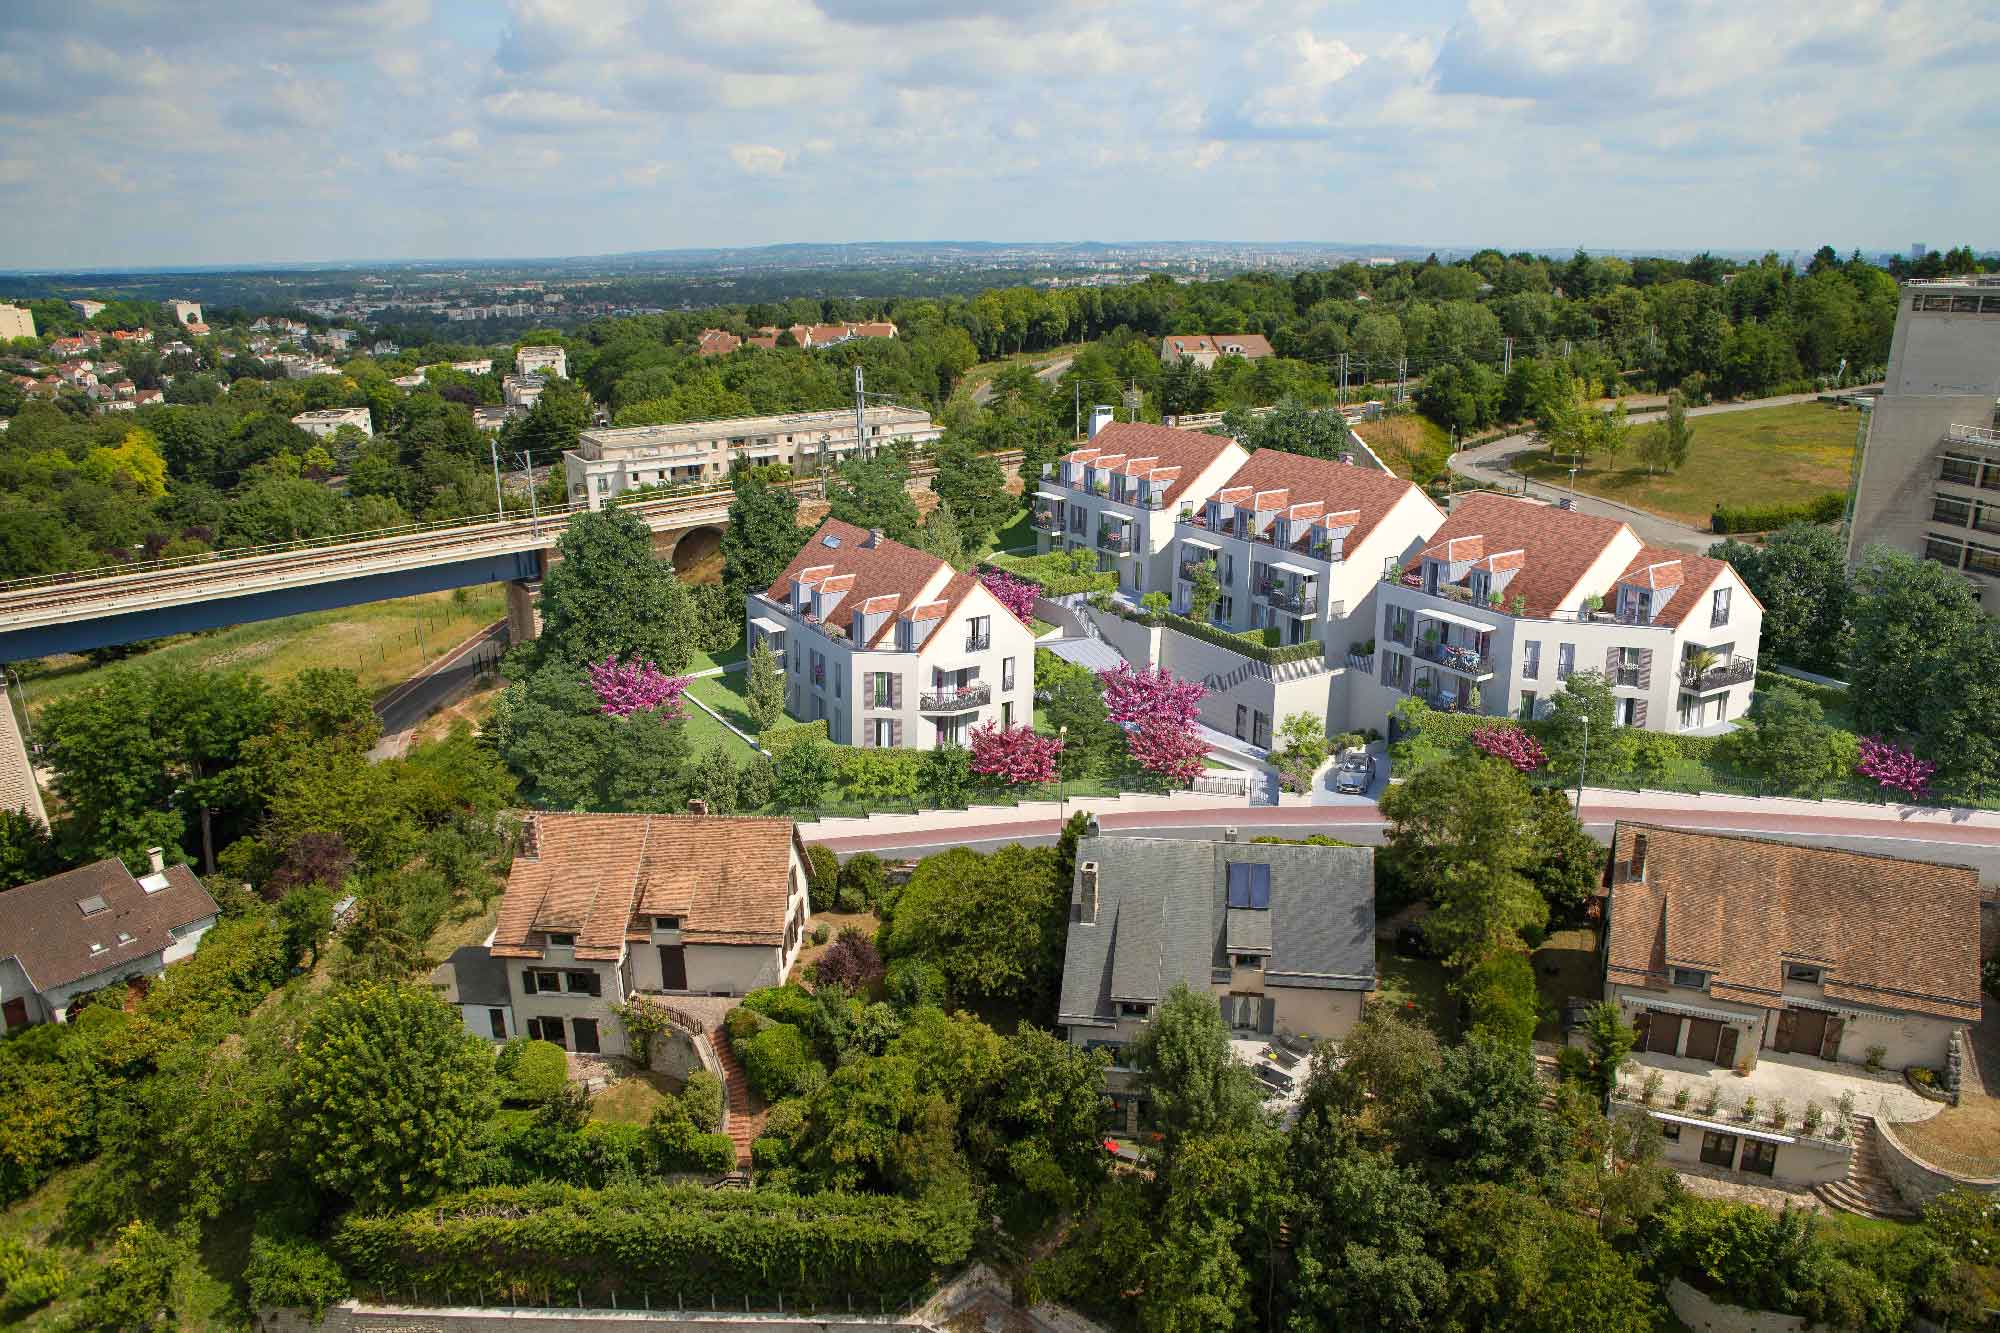 https://www.groupegambetta.fr/media/cache/resolve/slider_article_no_crop/perspective-programme-immobilier-neuf-marly-groupe-gambetta